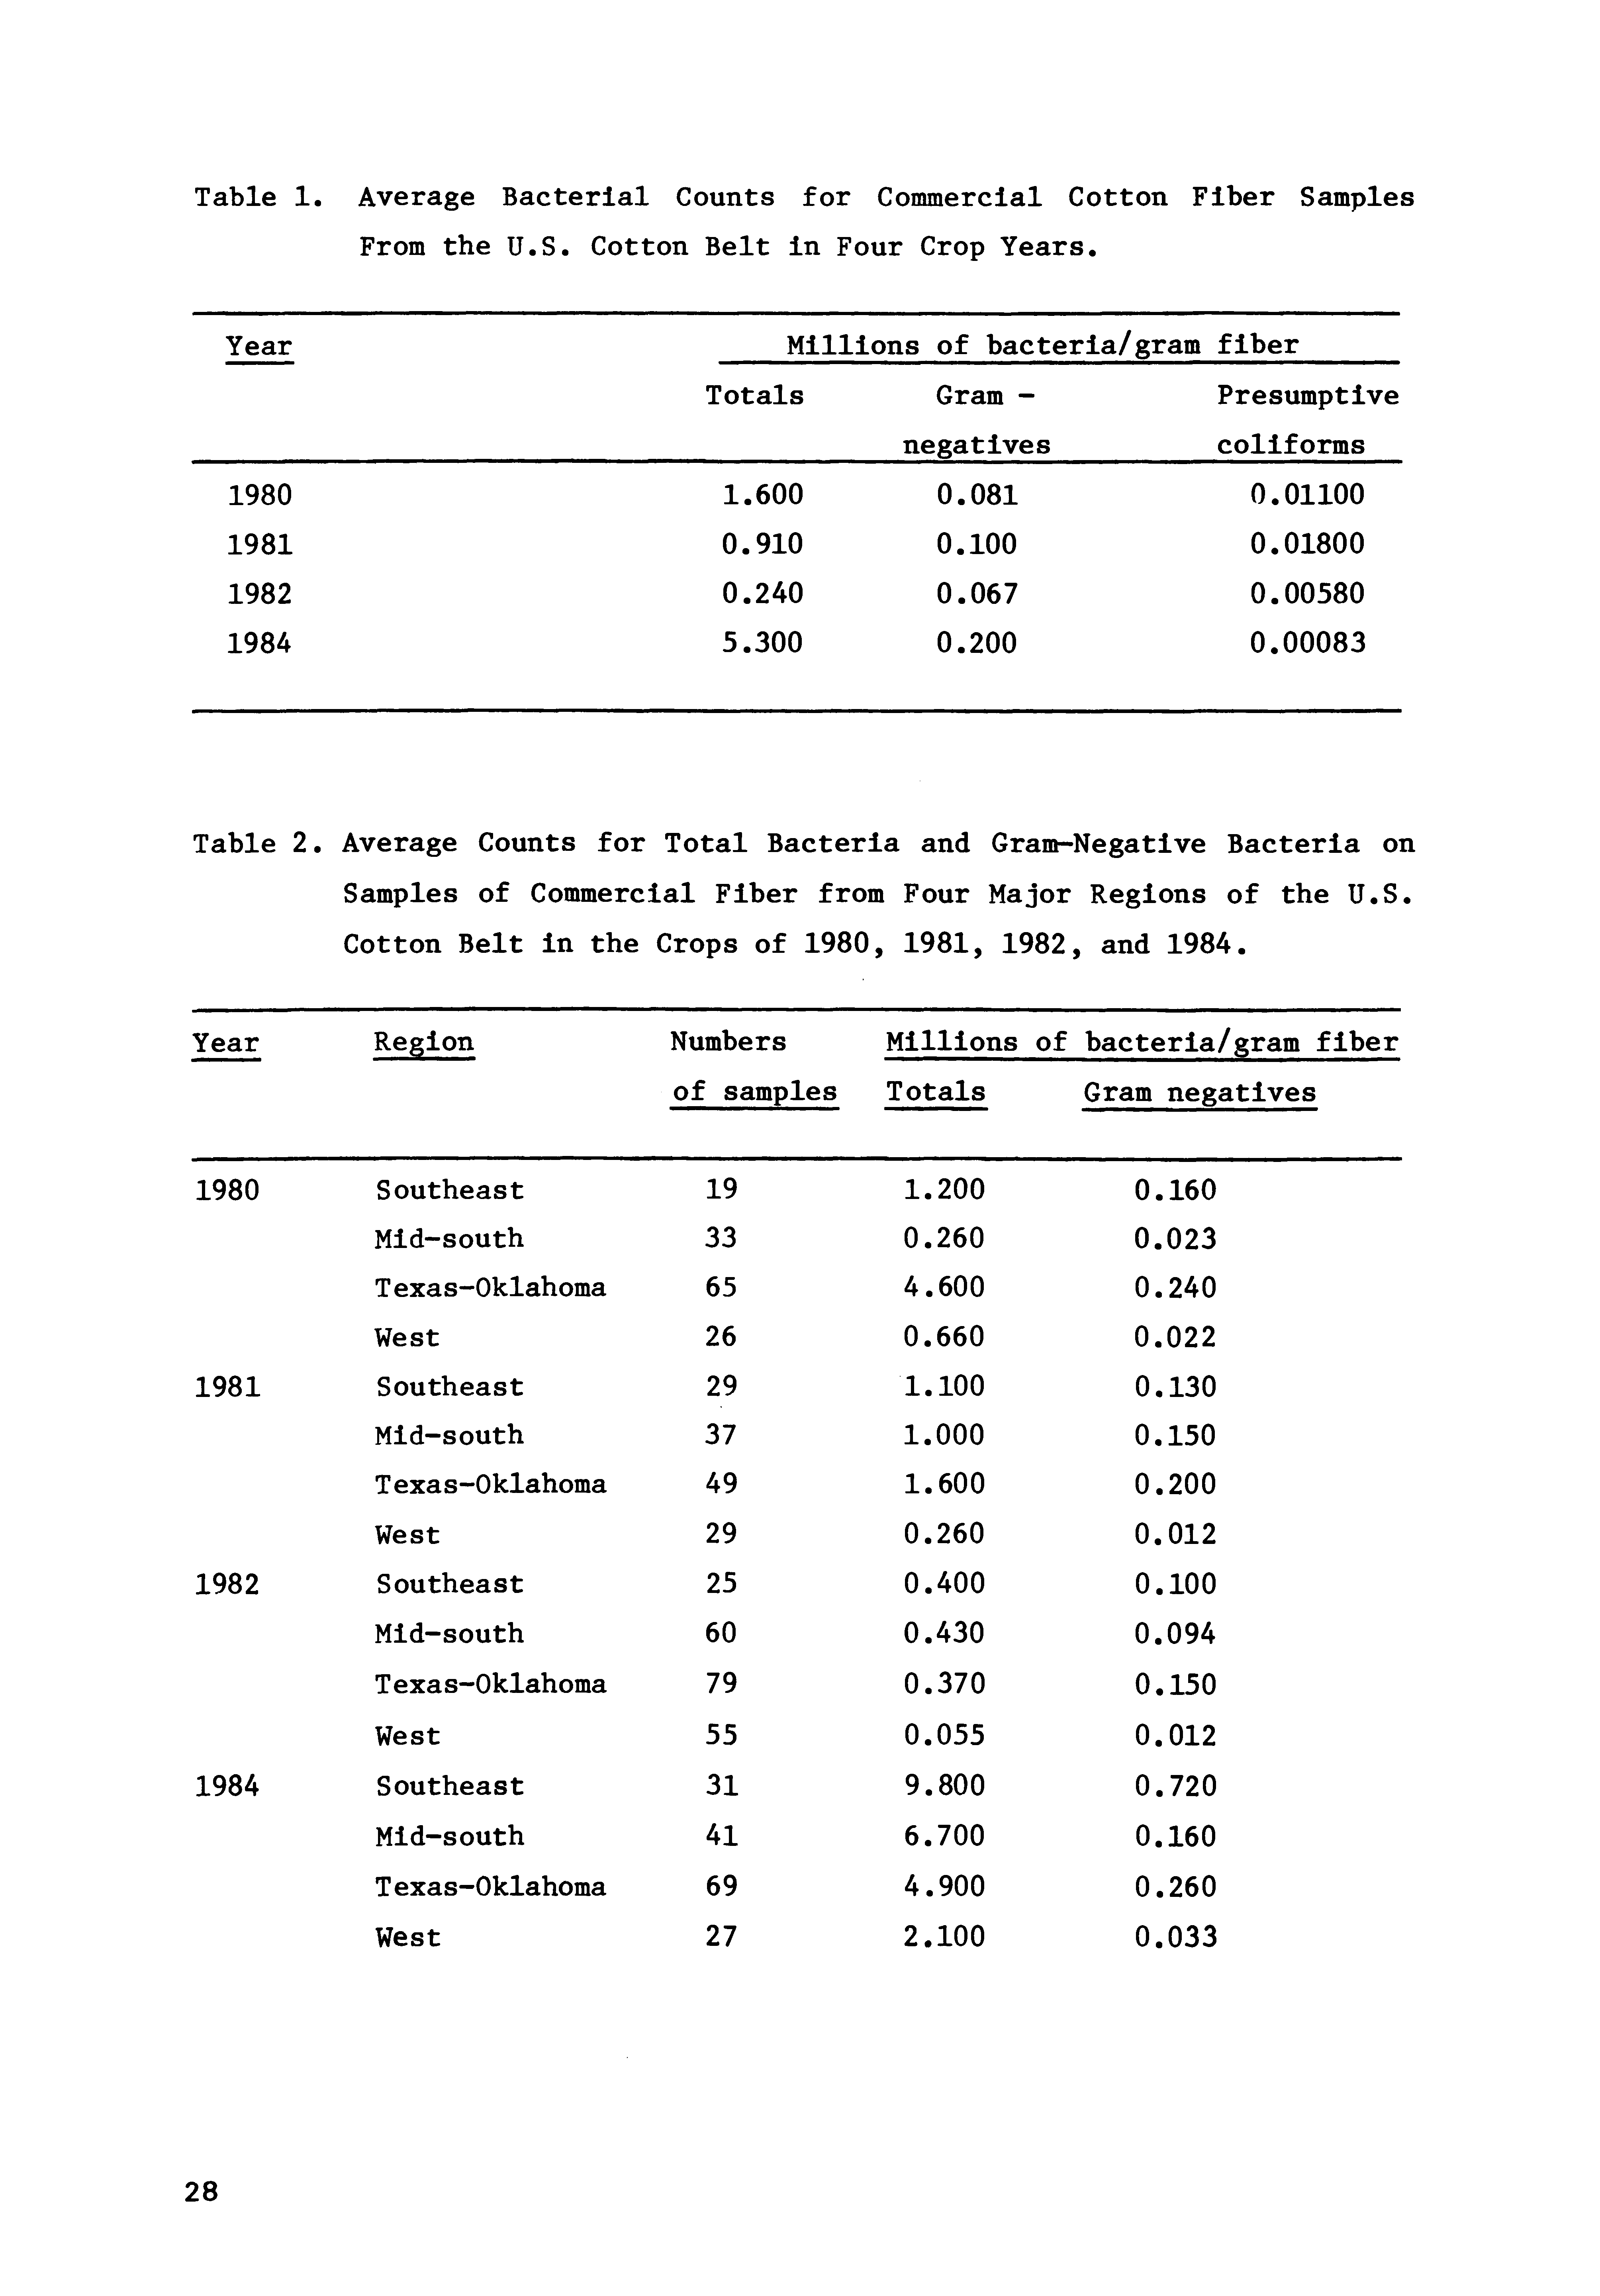 Table 2. Average Counts for Total Bacteria and Gram-Negative Bacteria on Samples of Commercial Fiber from Four Major Regions of the U.S. Cotton Belt in the Crops of 1980, 1981, 1982, and 1984.